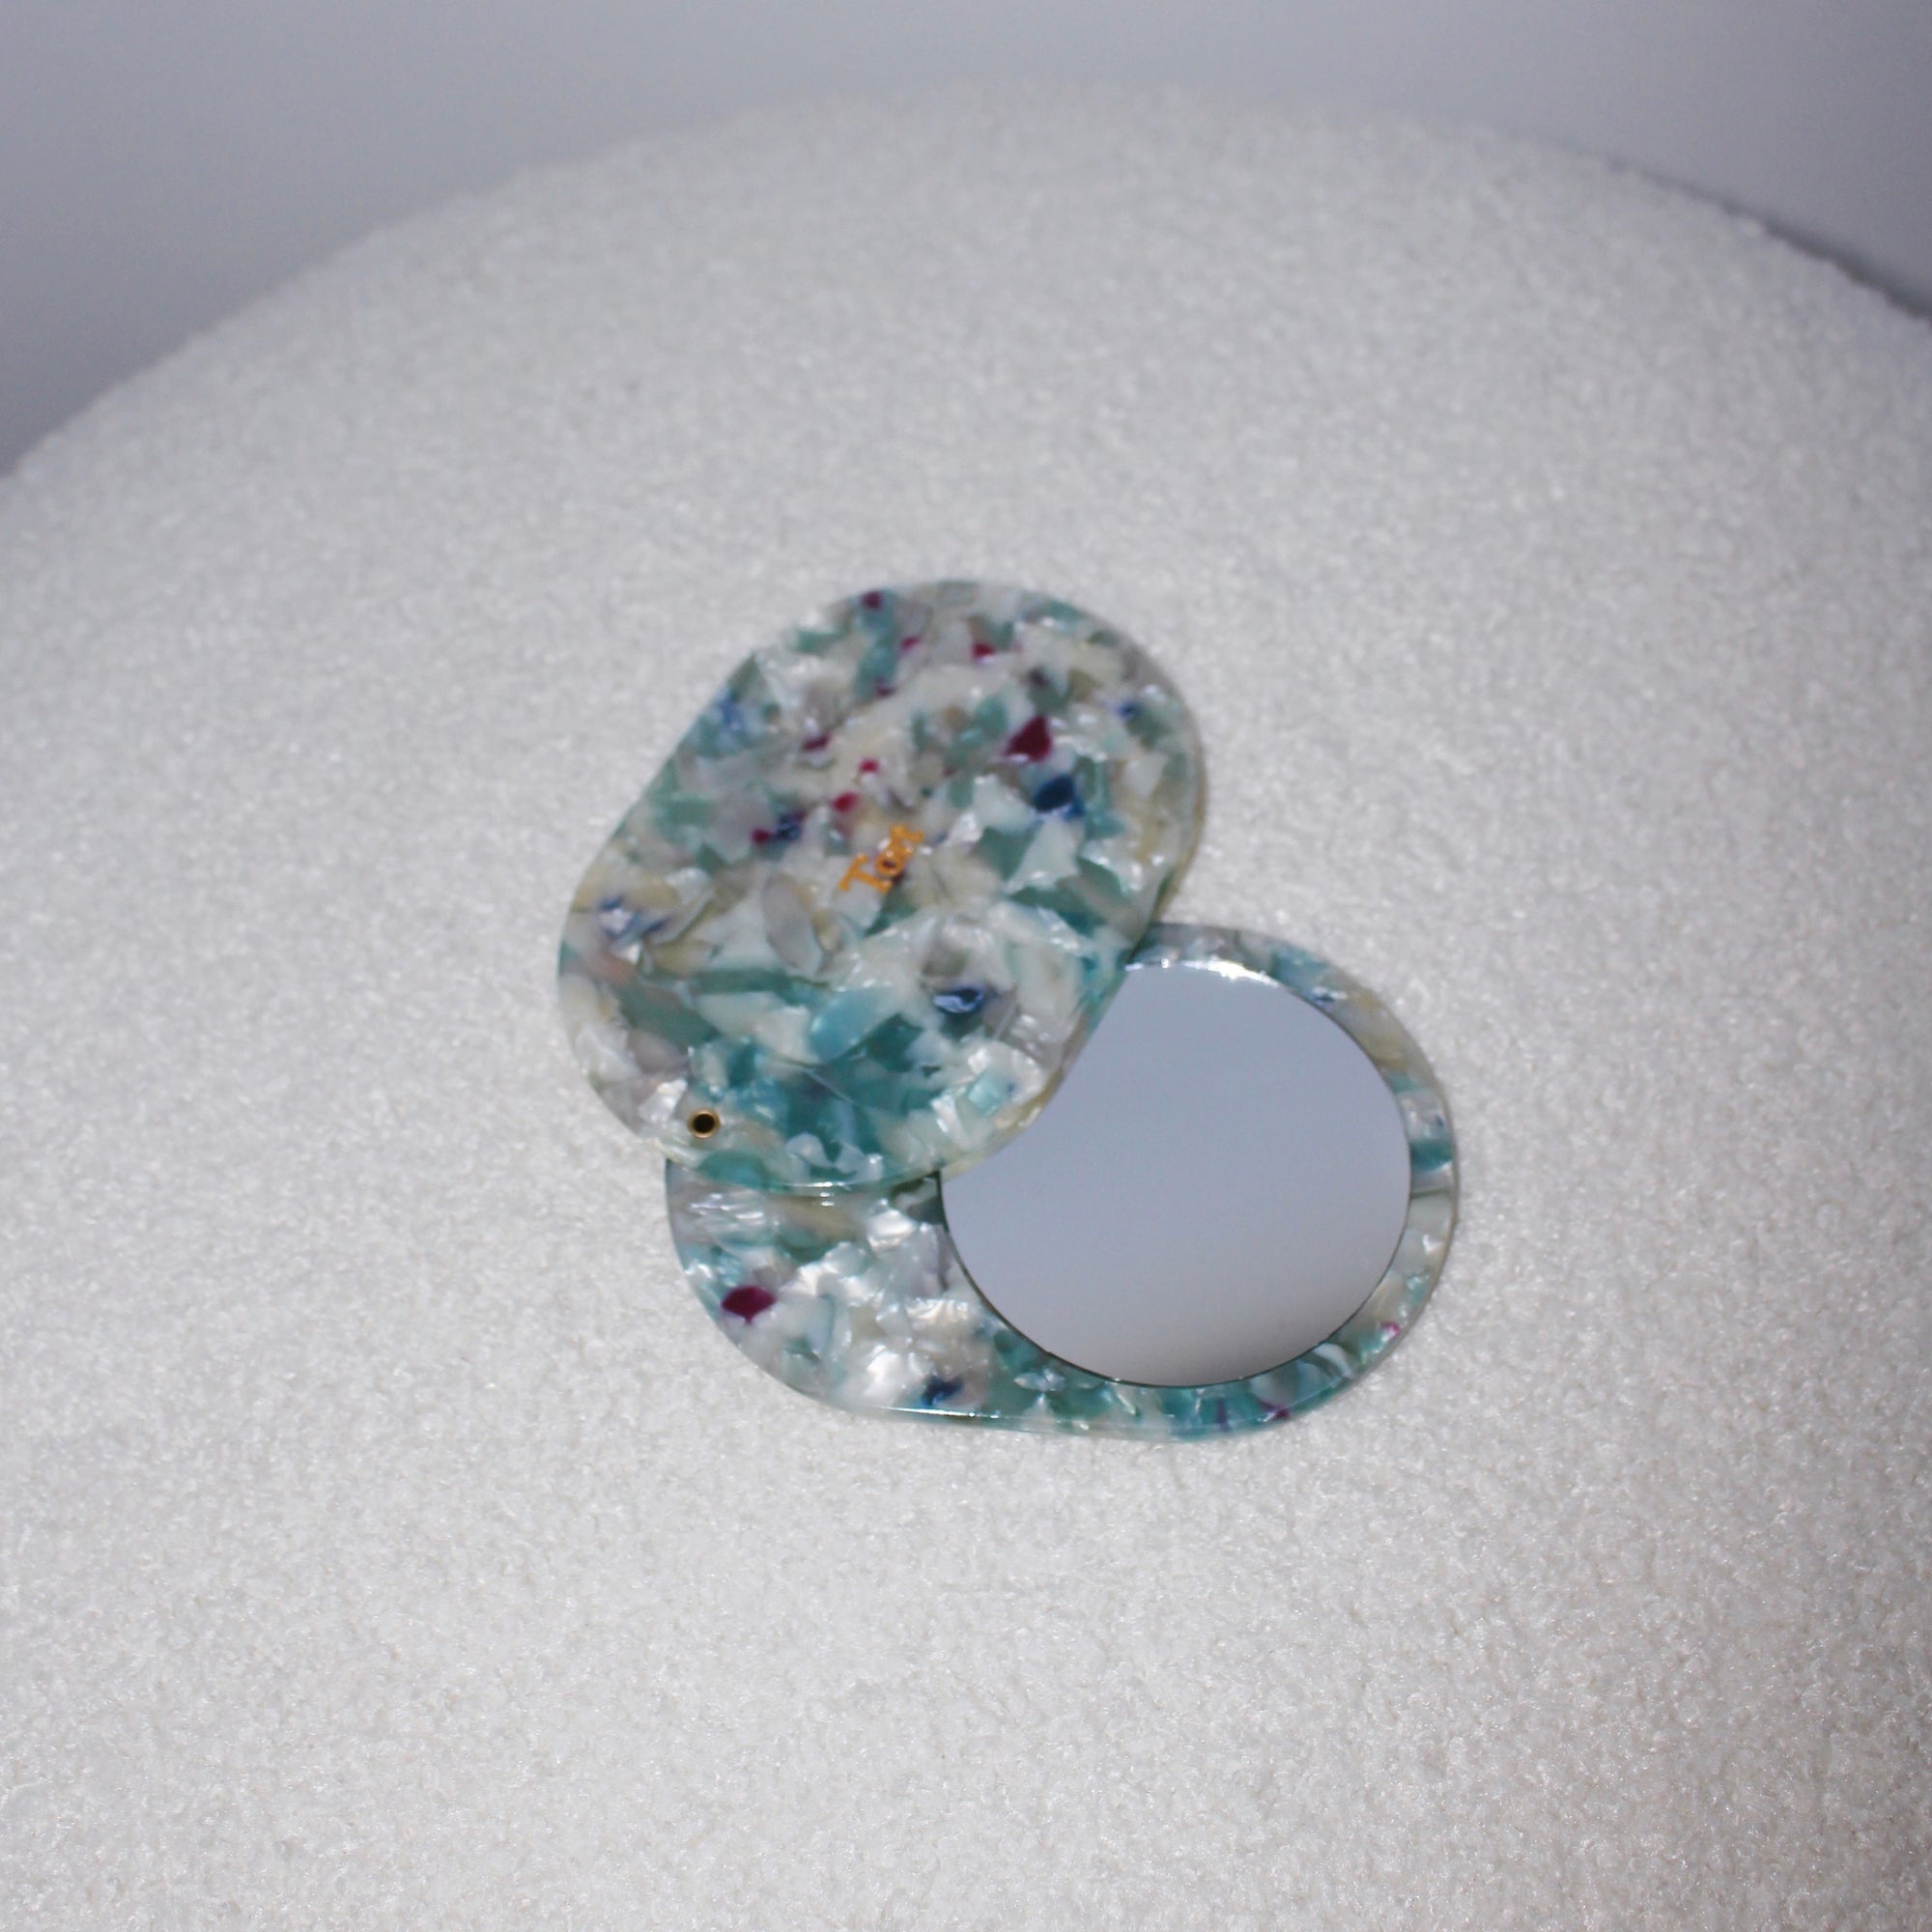 Meet JAYA!  A compact mirror is a handbag essential. Made from smooth, hand-poured eco-resin, the JAYA mirror is super cute with added protection and cleanliness through a sliding mechanism.  Each mirror comes in a branded Tort pouch (colours change seasonally).  Size: 10.5cm  Colour: marbled ice blue, white and green with navy and magenta pieces  Material: eco-resin